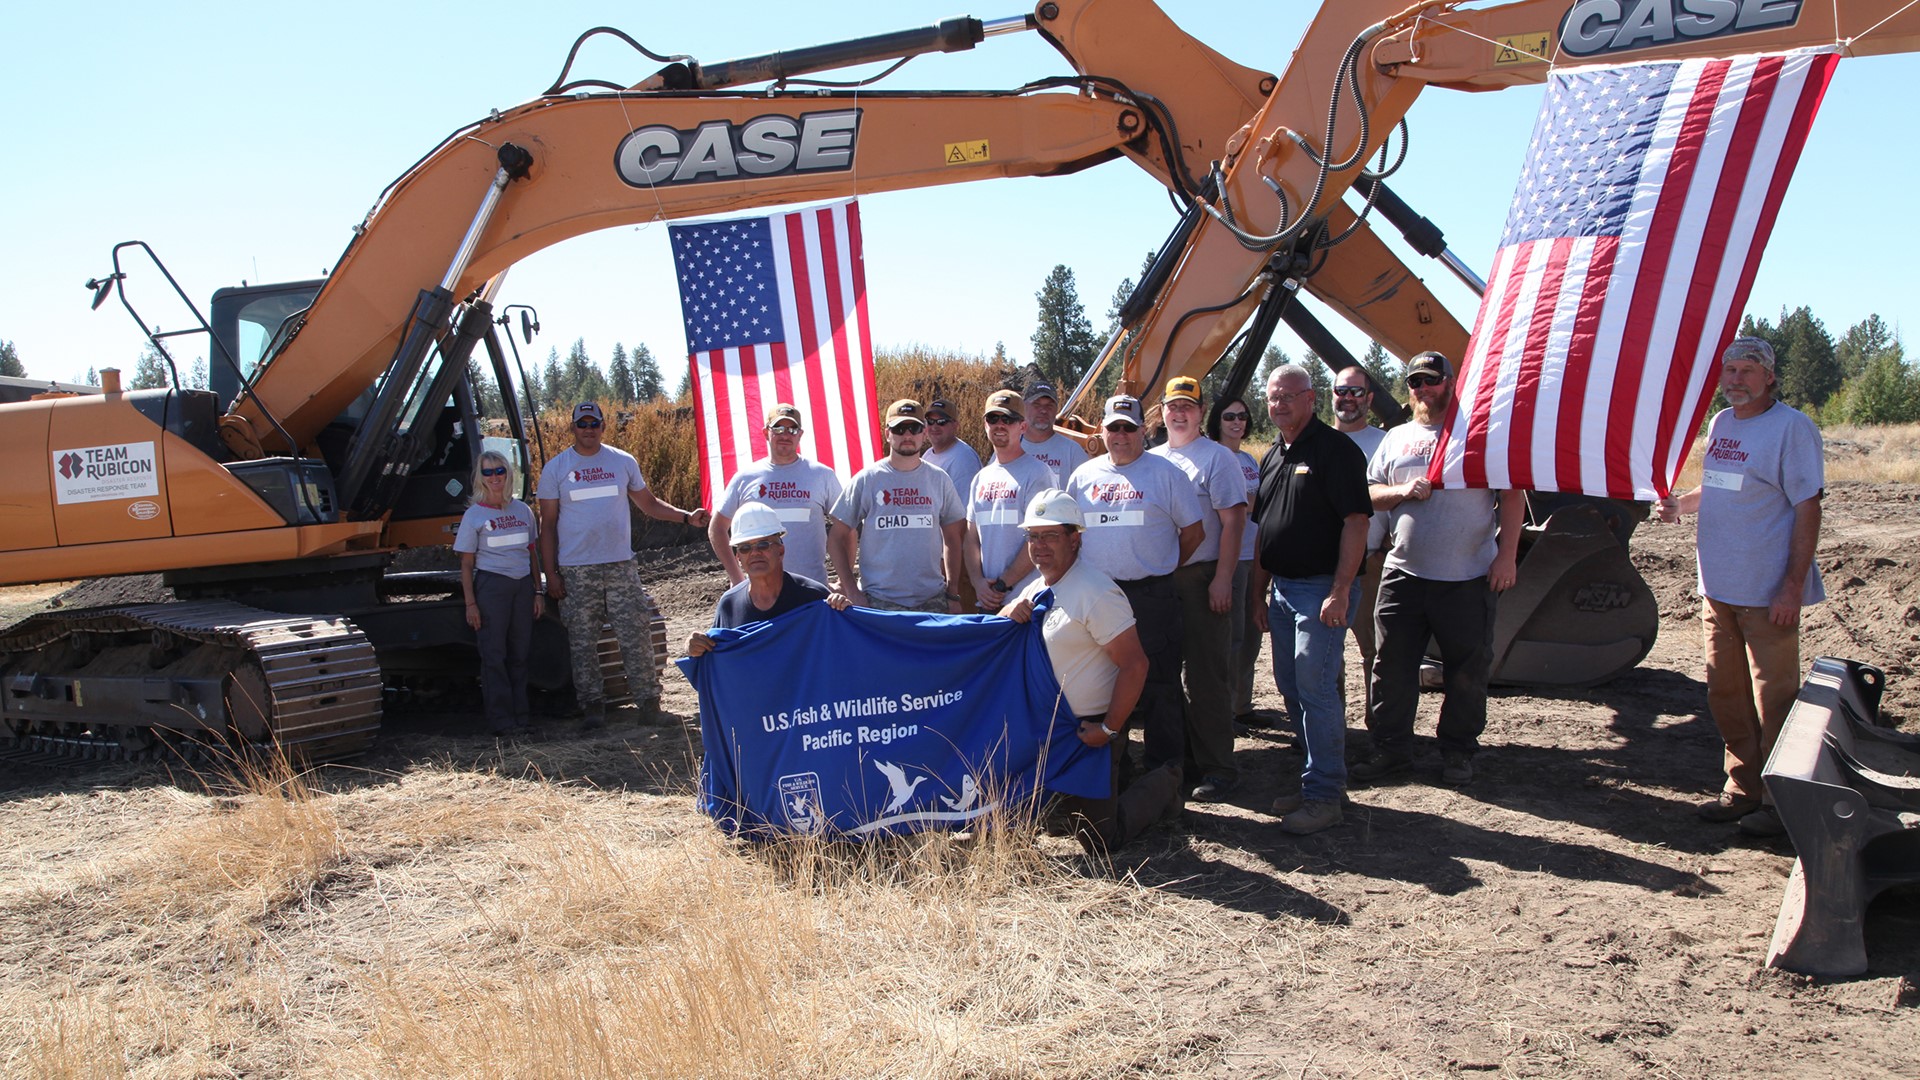 CASE Construction Equipment and Central Machinery provided equipment and product/training support to Team Rubicon